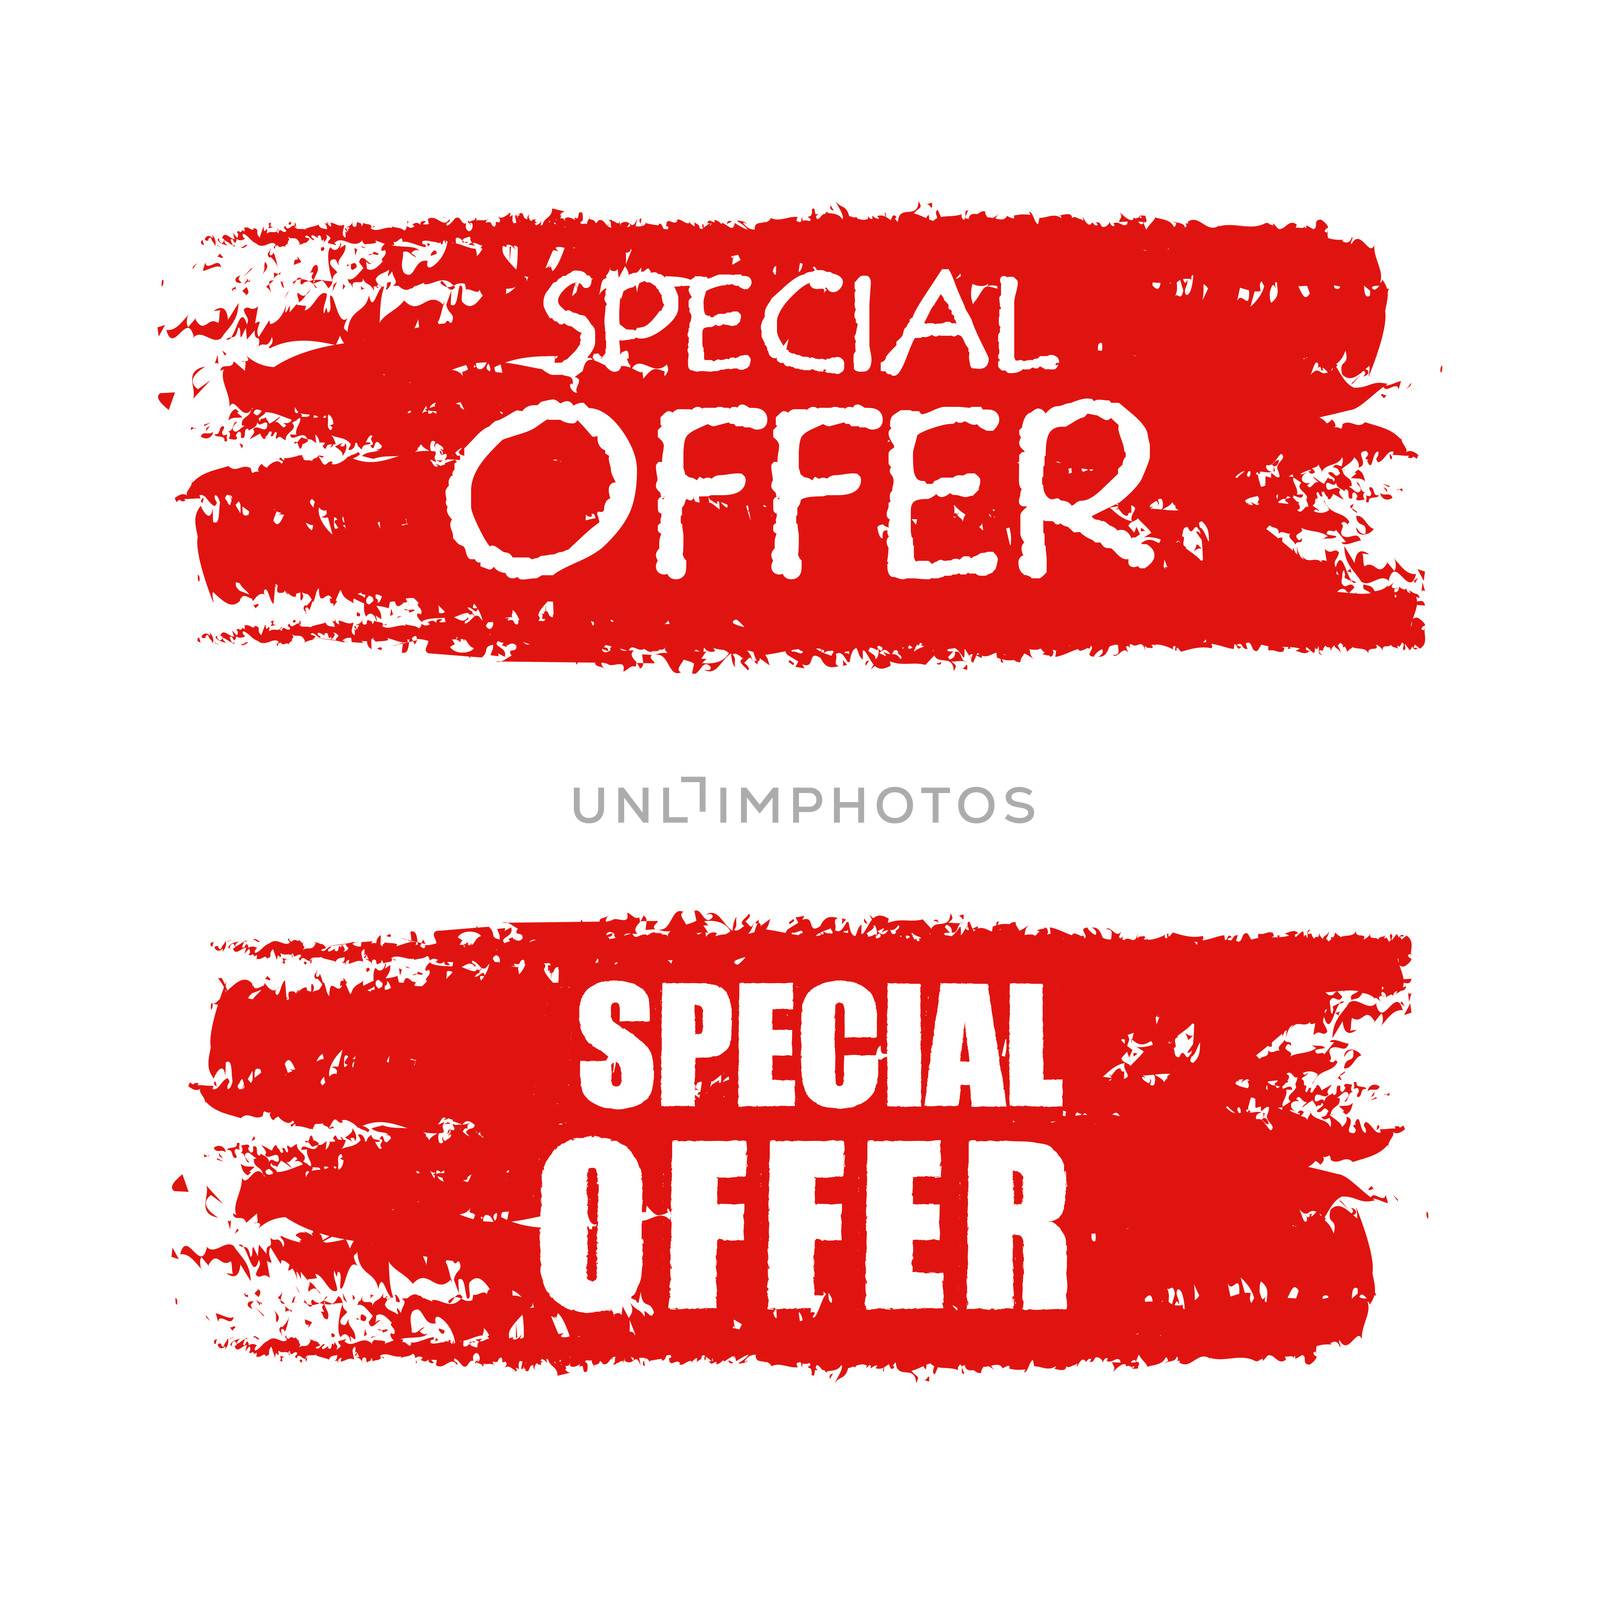 special offer - text on red drawn banner, business concept